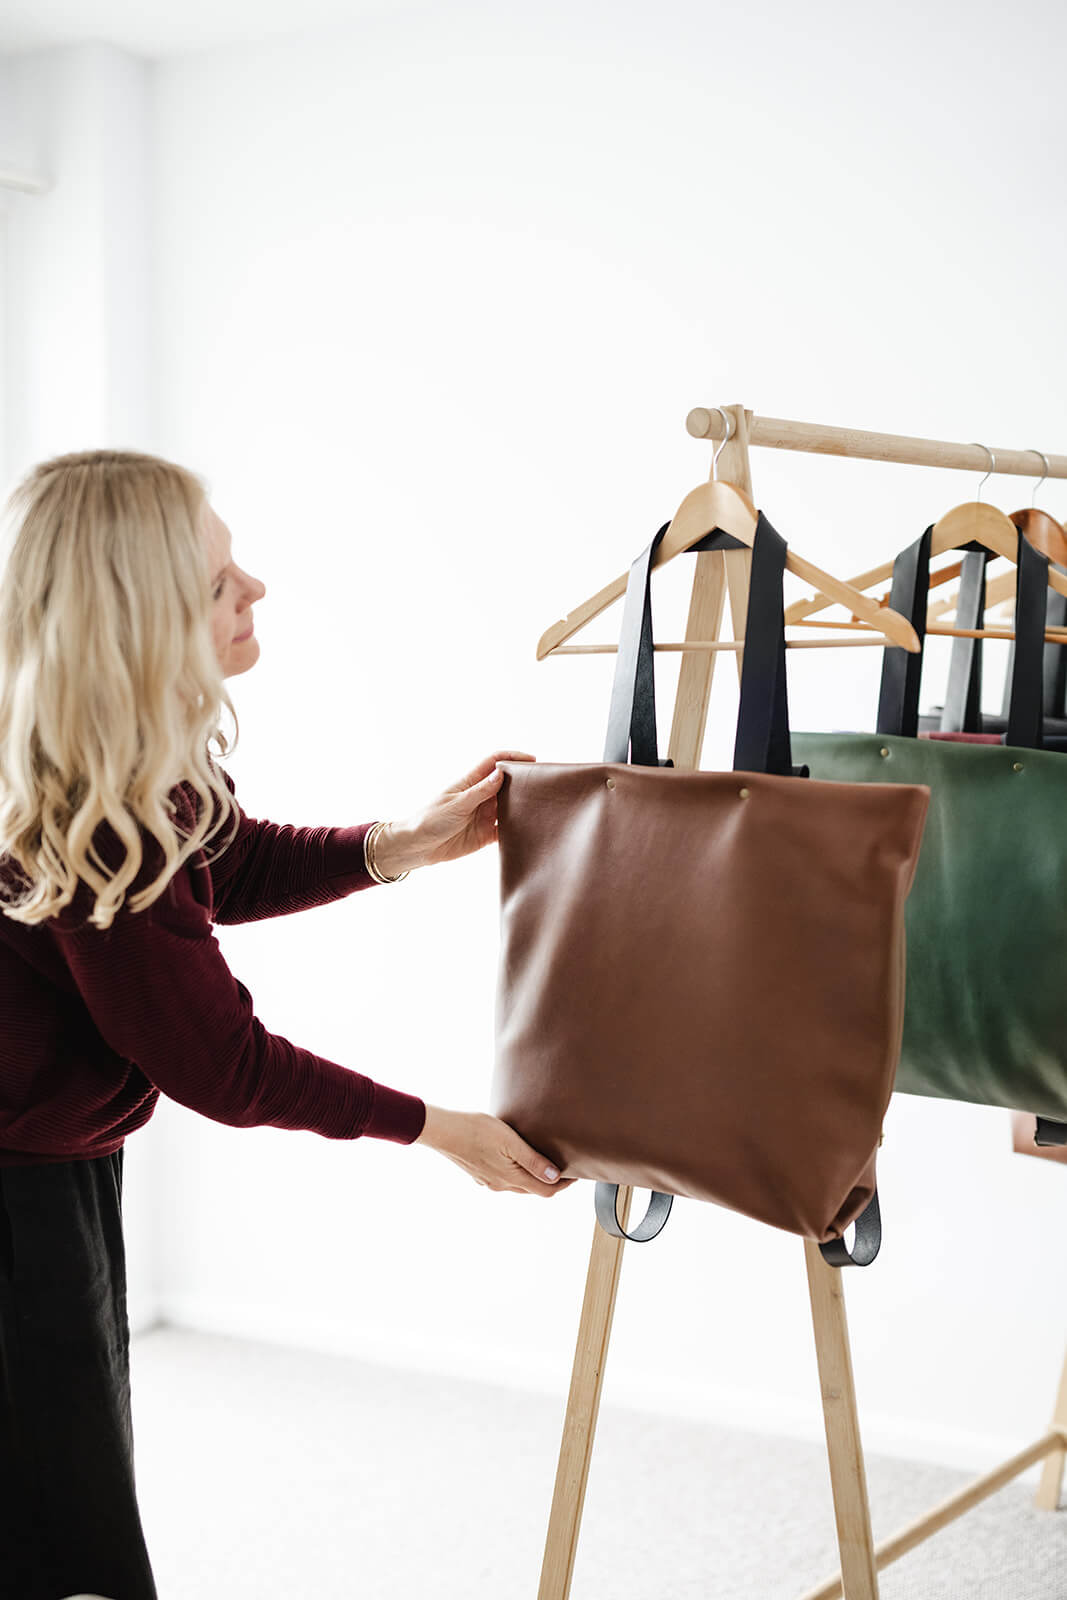 Tan Leather Backpack & Tote in Ella Jackson brand hanging on timber clothes rack as a tote and showing black leather tote straps. Designer and Maker, Ella Jackson standing behind adjusting bags on hooks and wearing black pants and a maroon jumper with wavy blonde hair